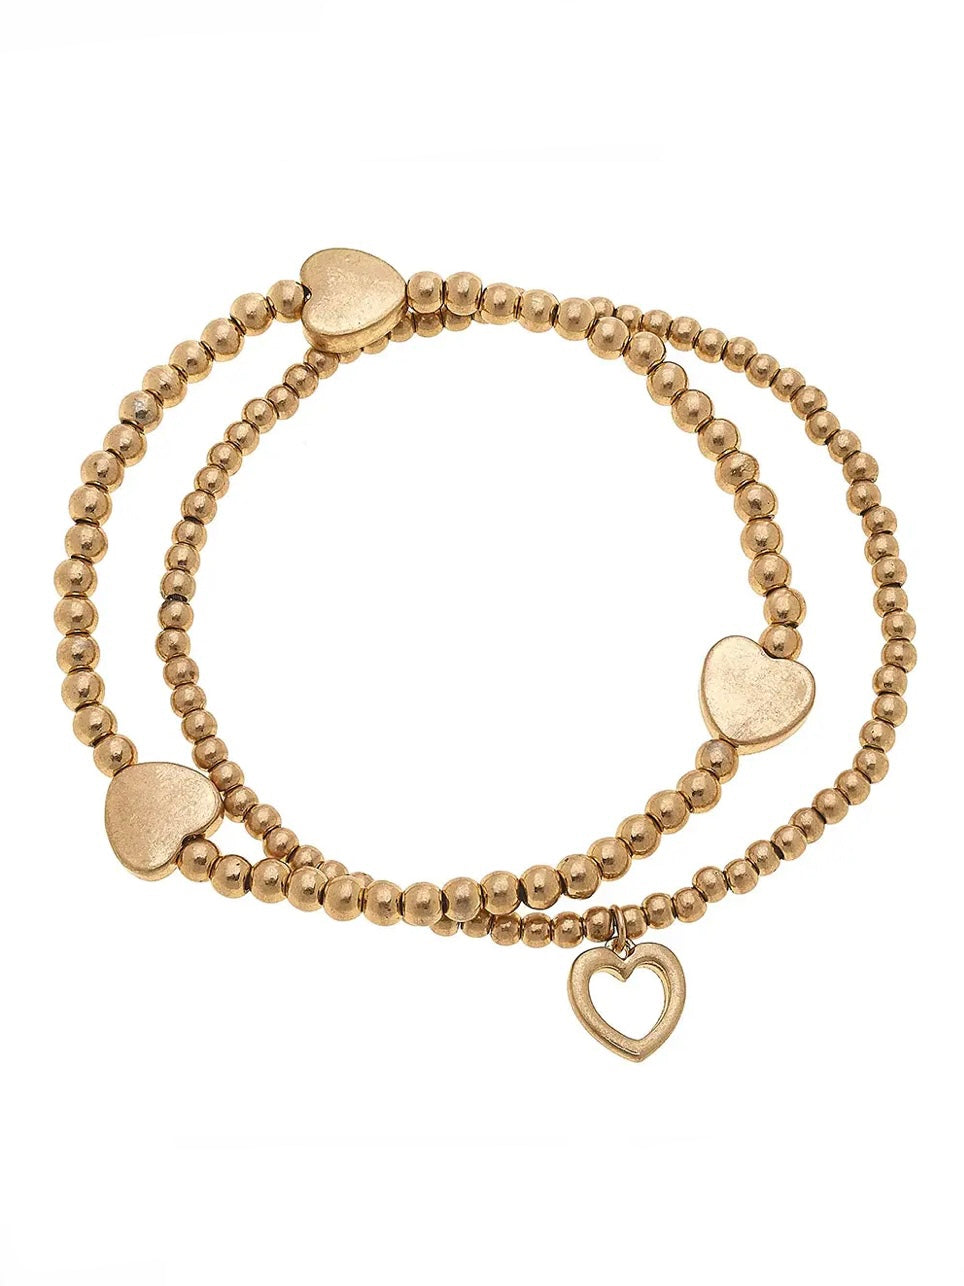 Aria Layered Bracelets in Worn Gold (Set of 2) - Hearts